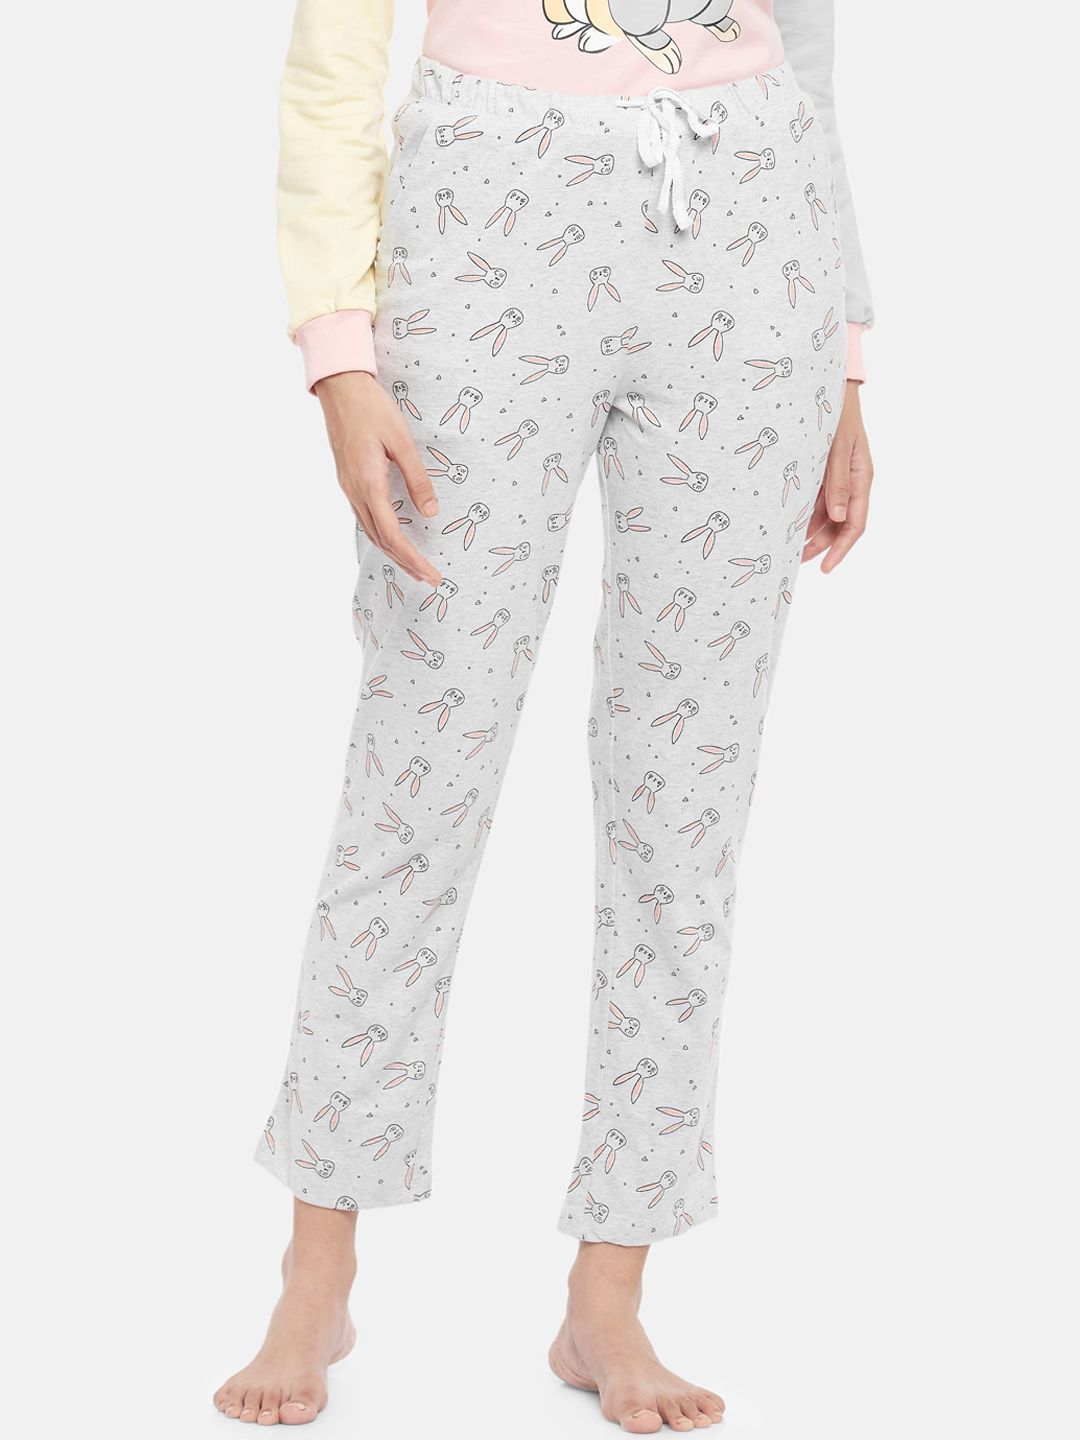 Dreamz by Pantaloons Women Grey Cotton Printed Lounge Pants Price in India